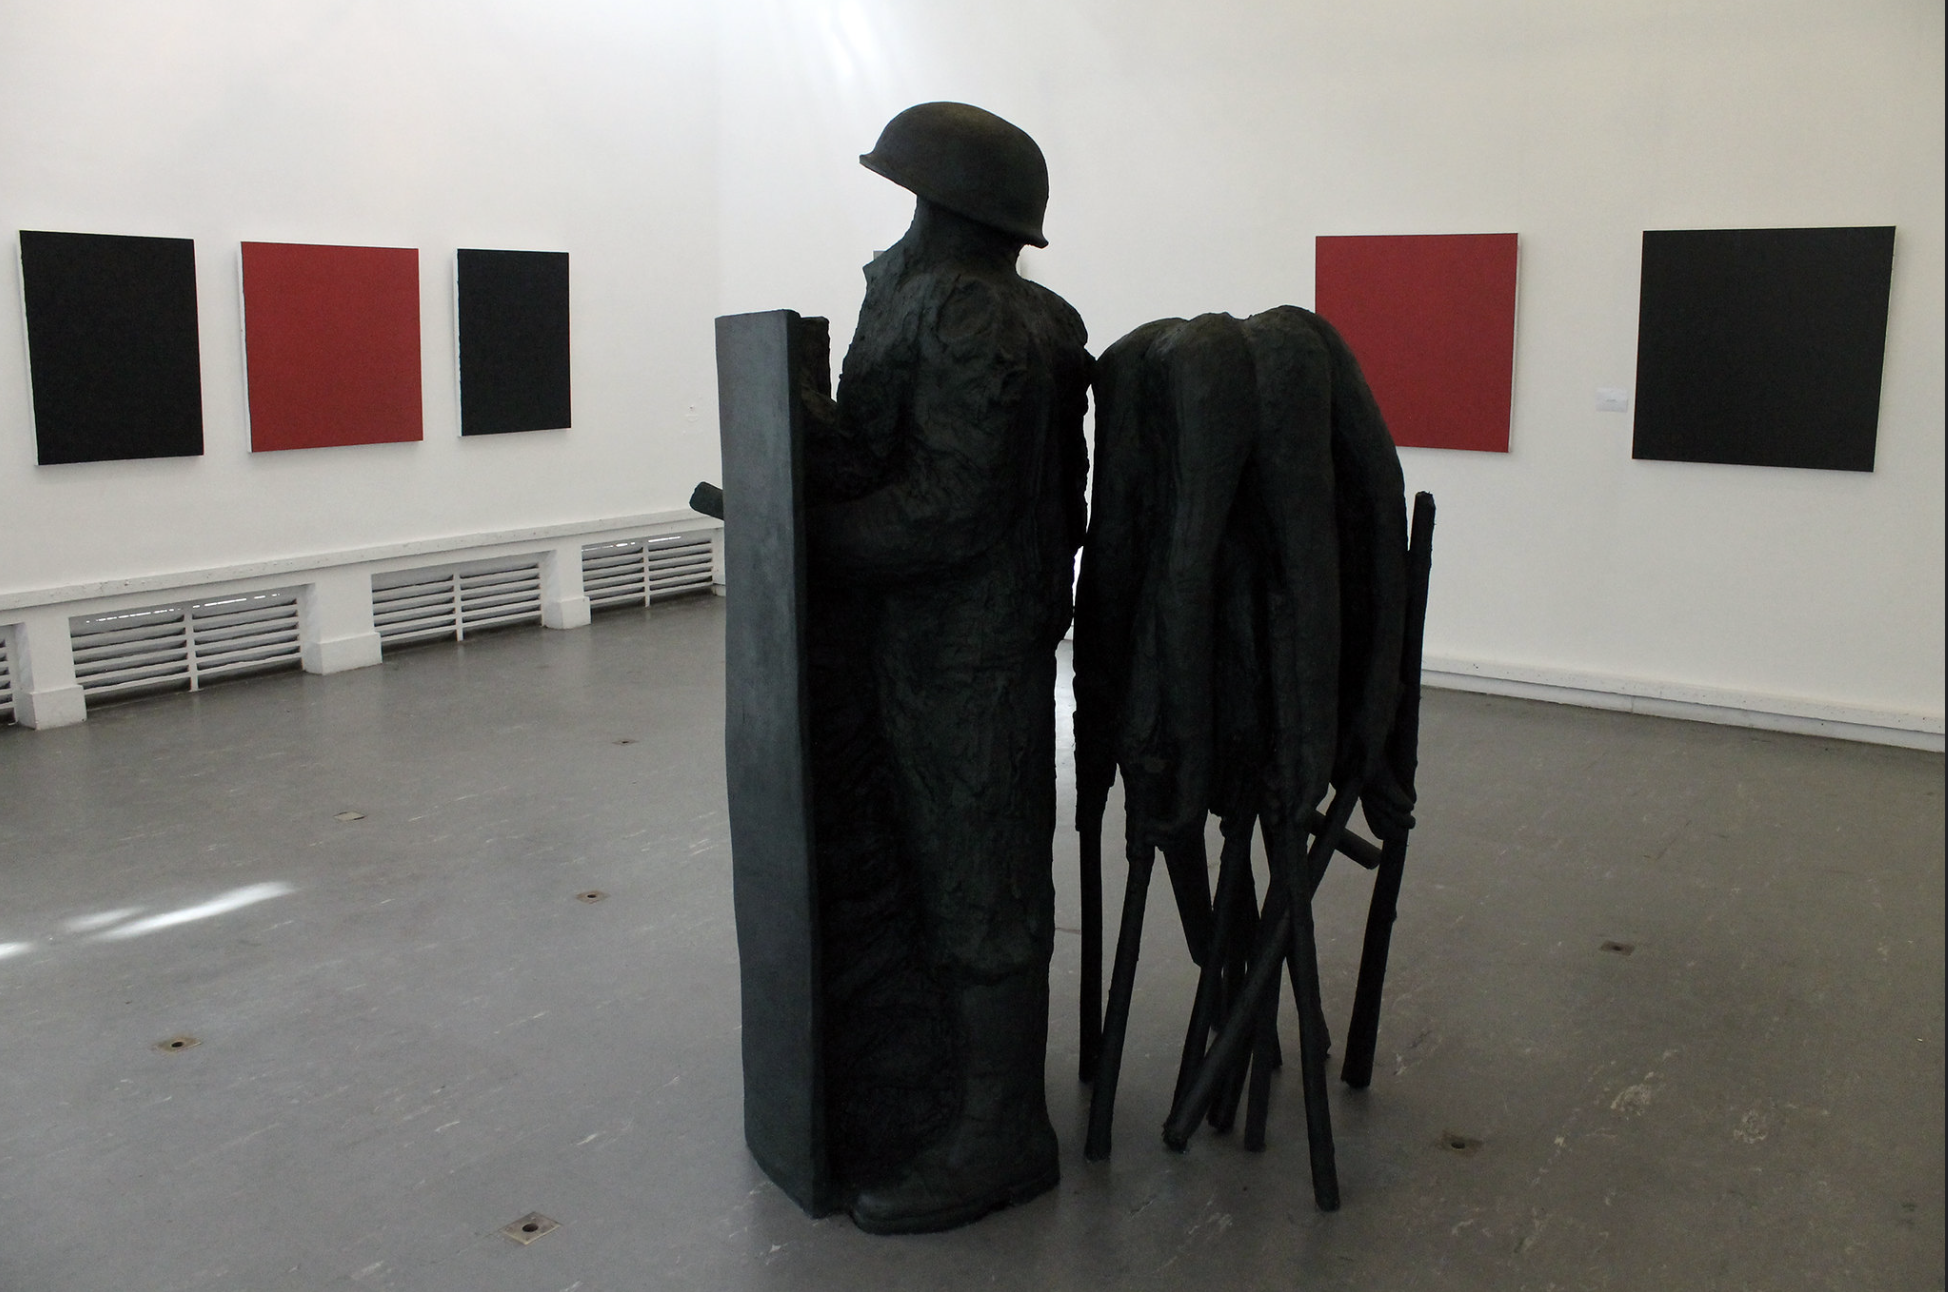 a statue of a man in a room with red and black art